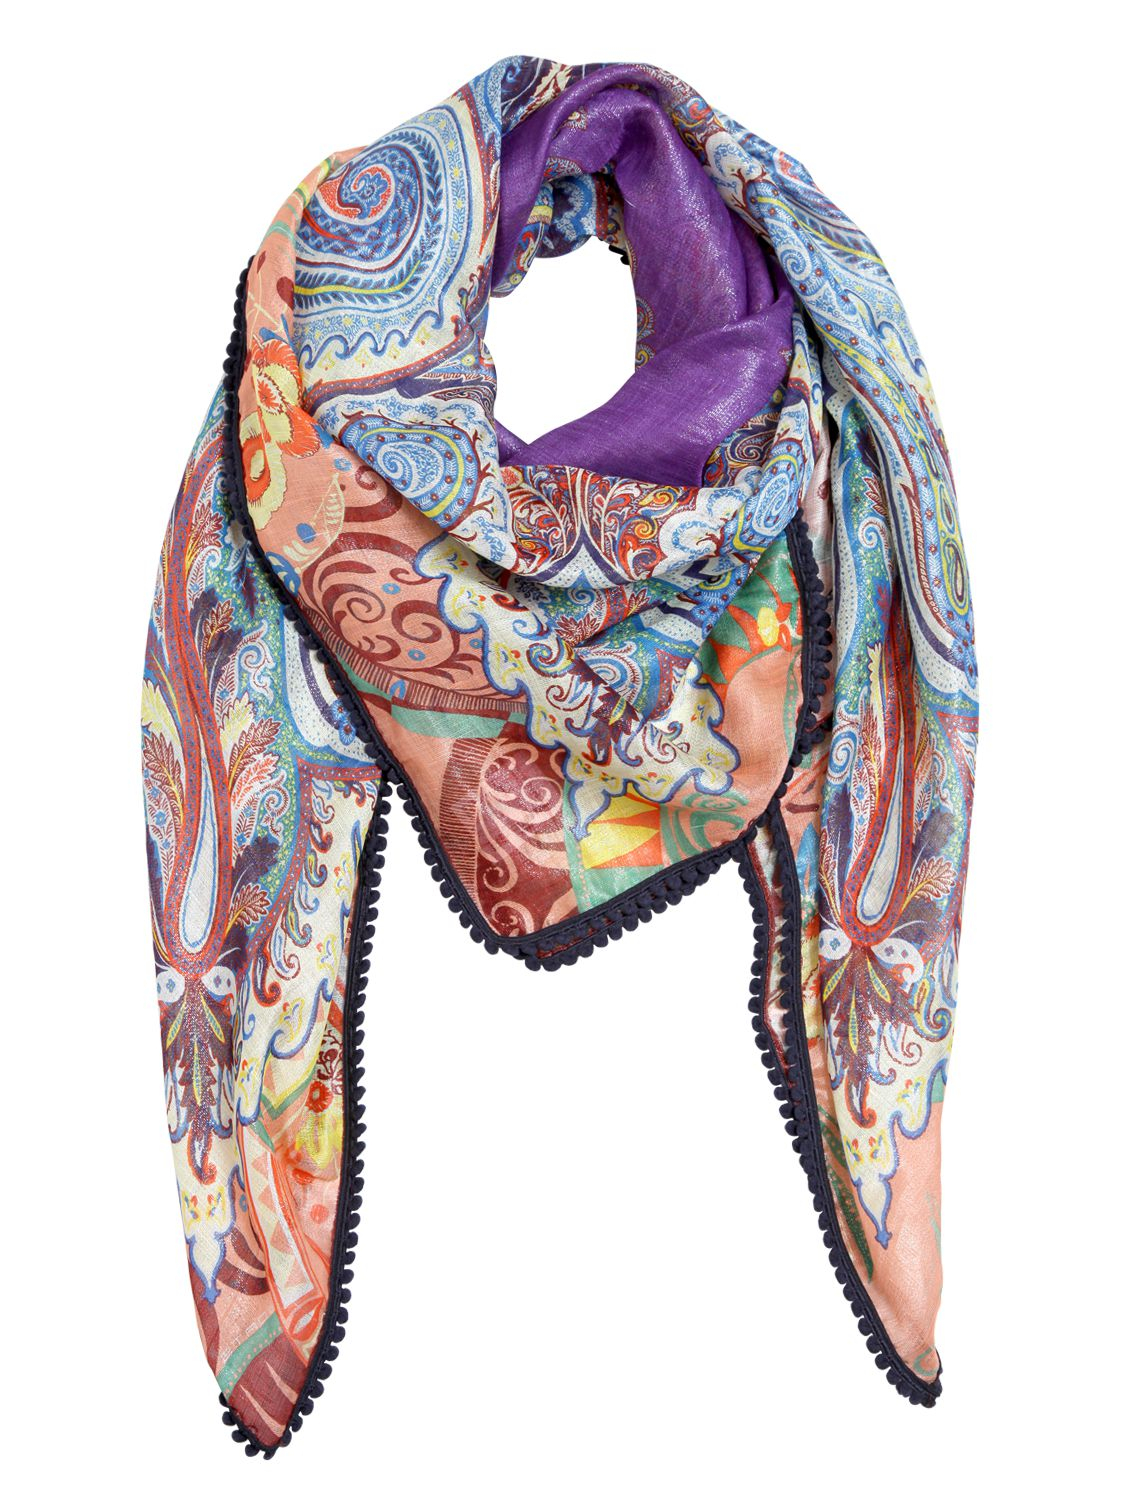 Etro Printed Cotton & Silk Blend Square Scarf in Purple for Men - Lyst